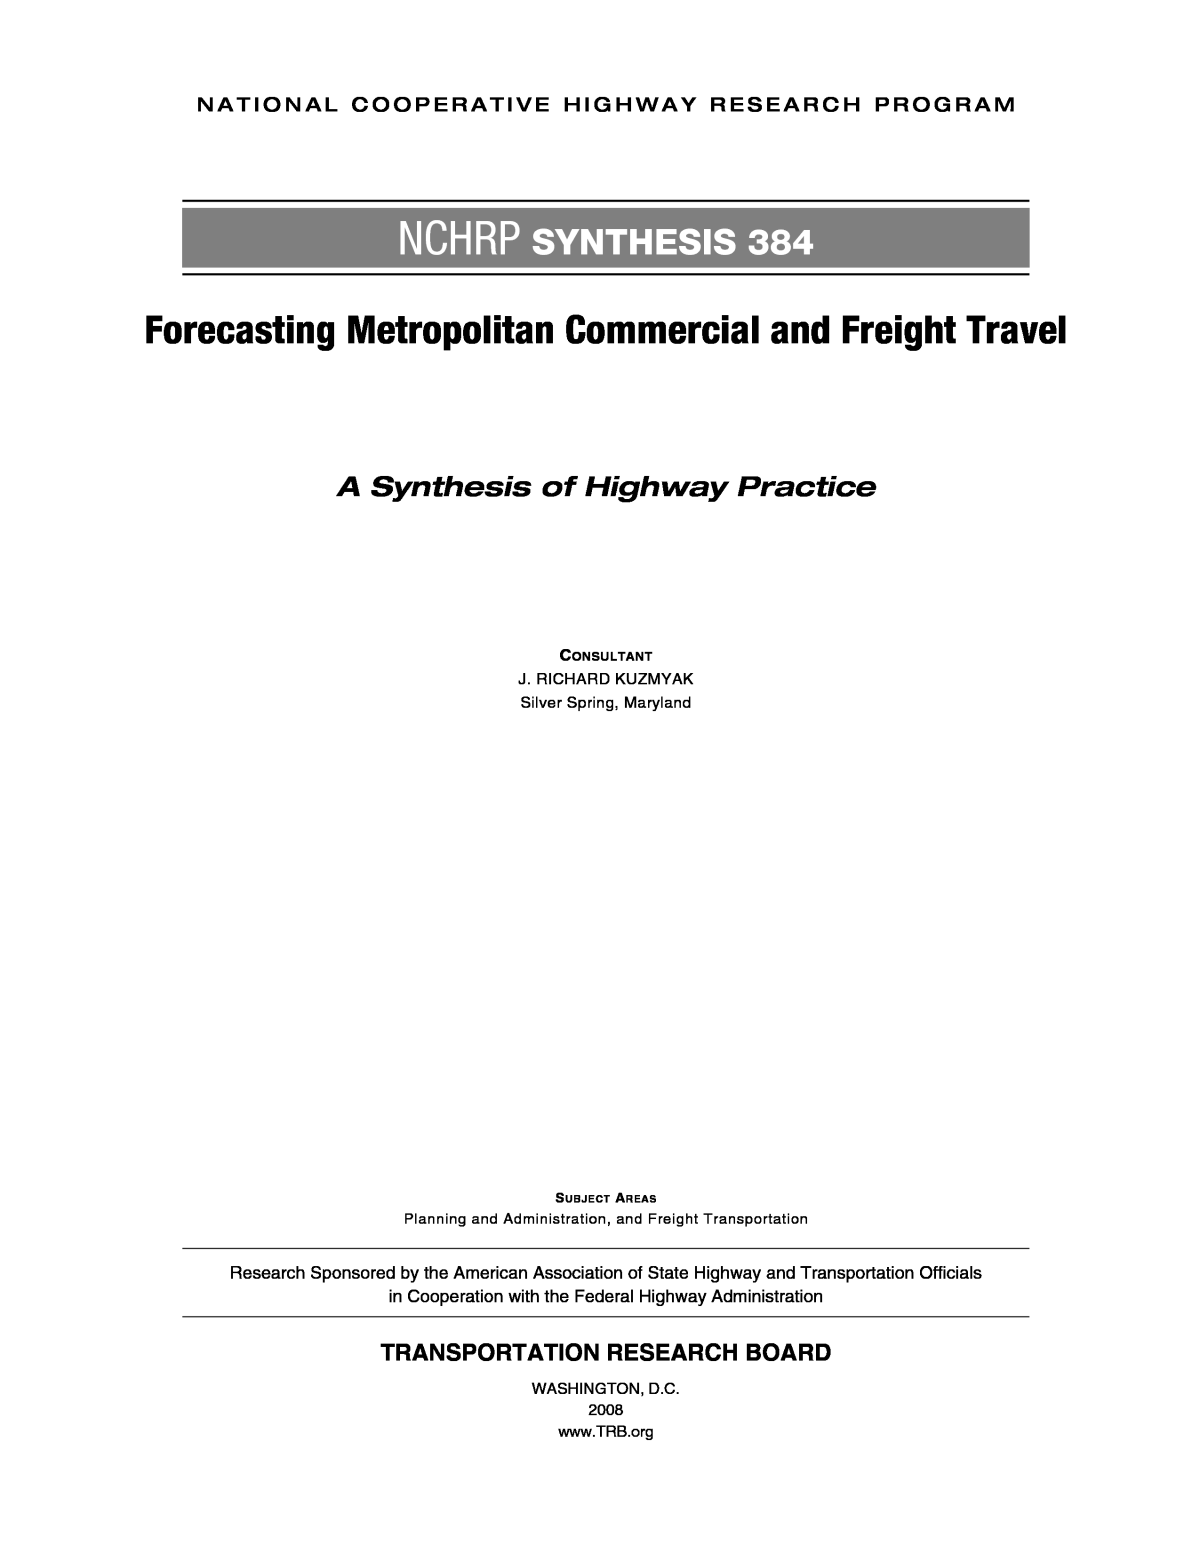 Front Matter, Forecasting Metropolitan Commercial and Freight Travel